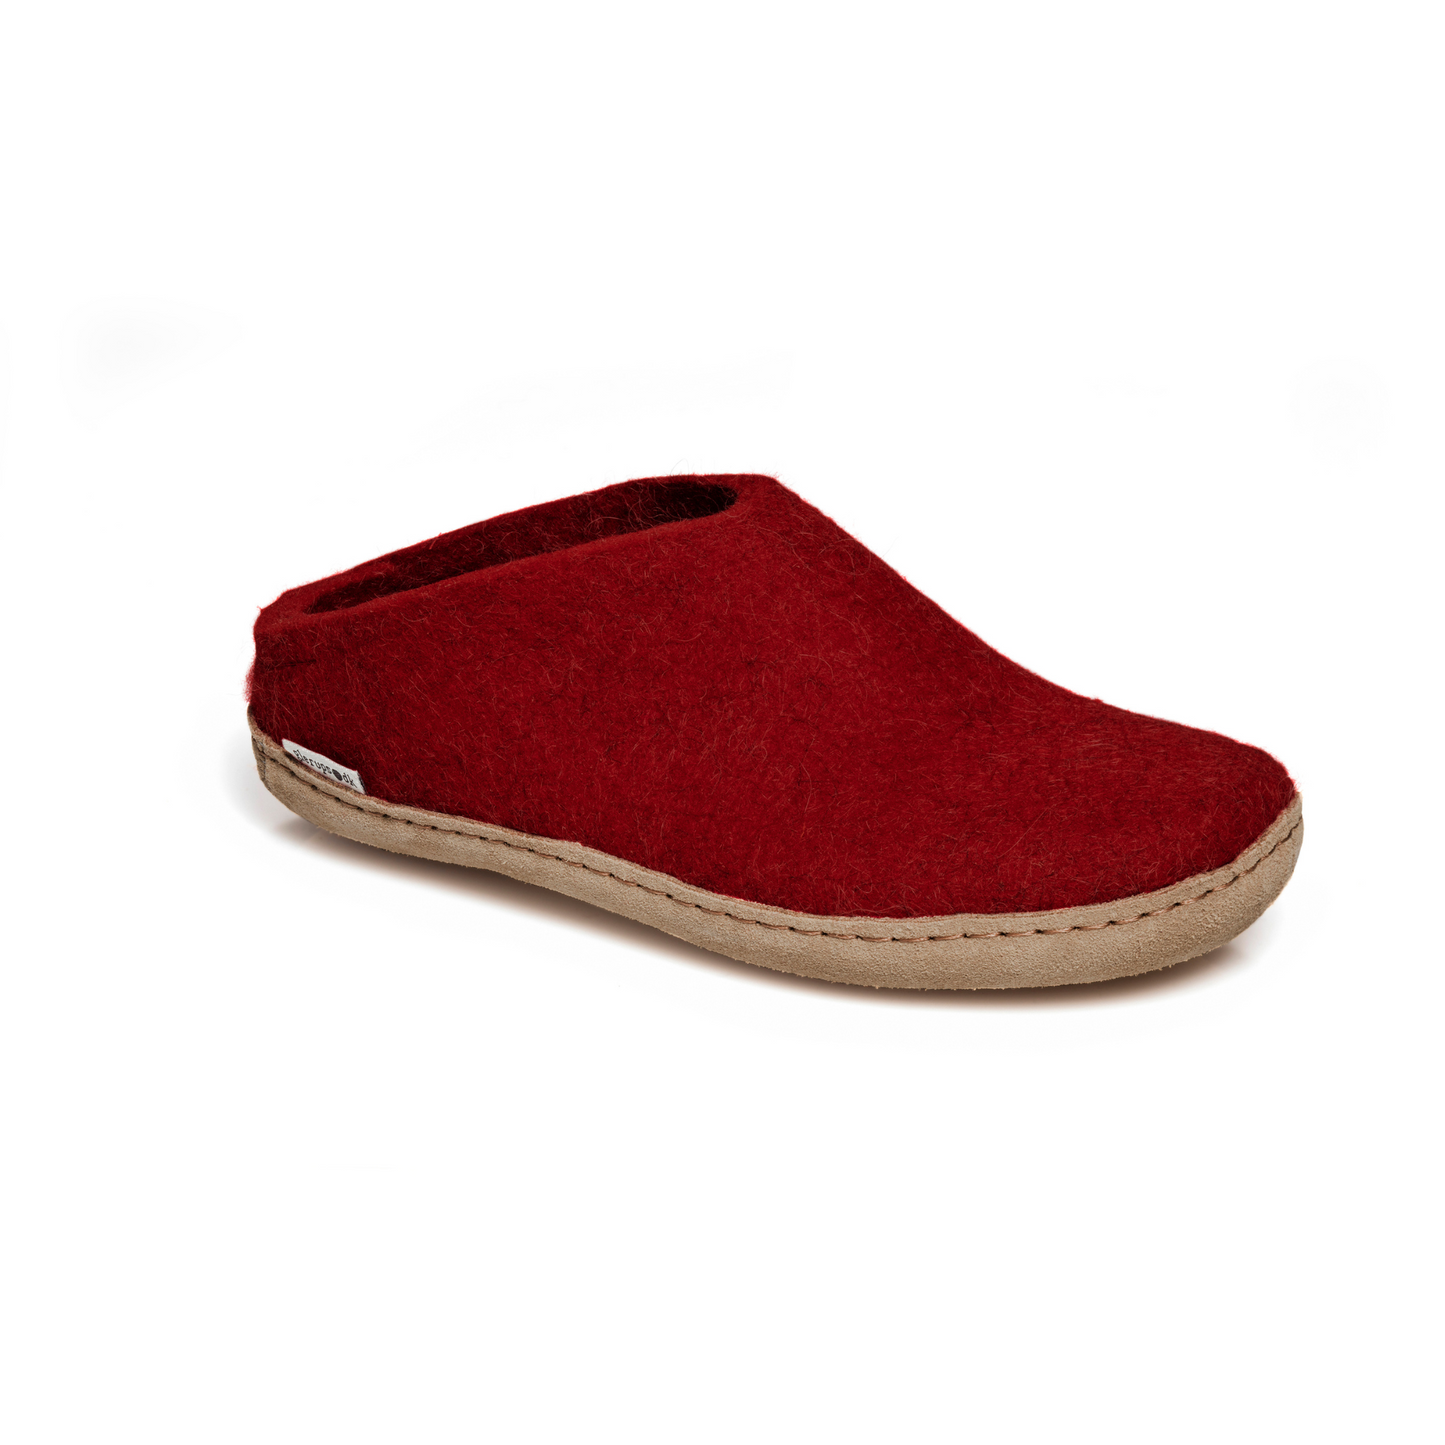 A felted deep crimson slipper pictured at a slight angle, showing part of the top front and side of the slipper. A tan leather sole lines the bottom of the shoe with a row of stitching.